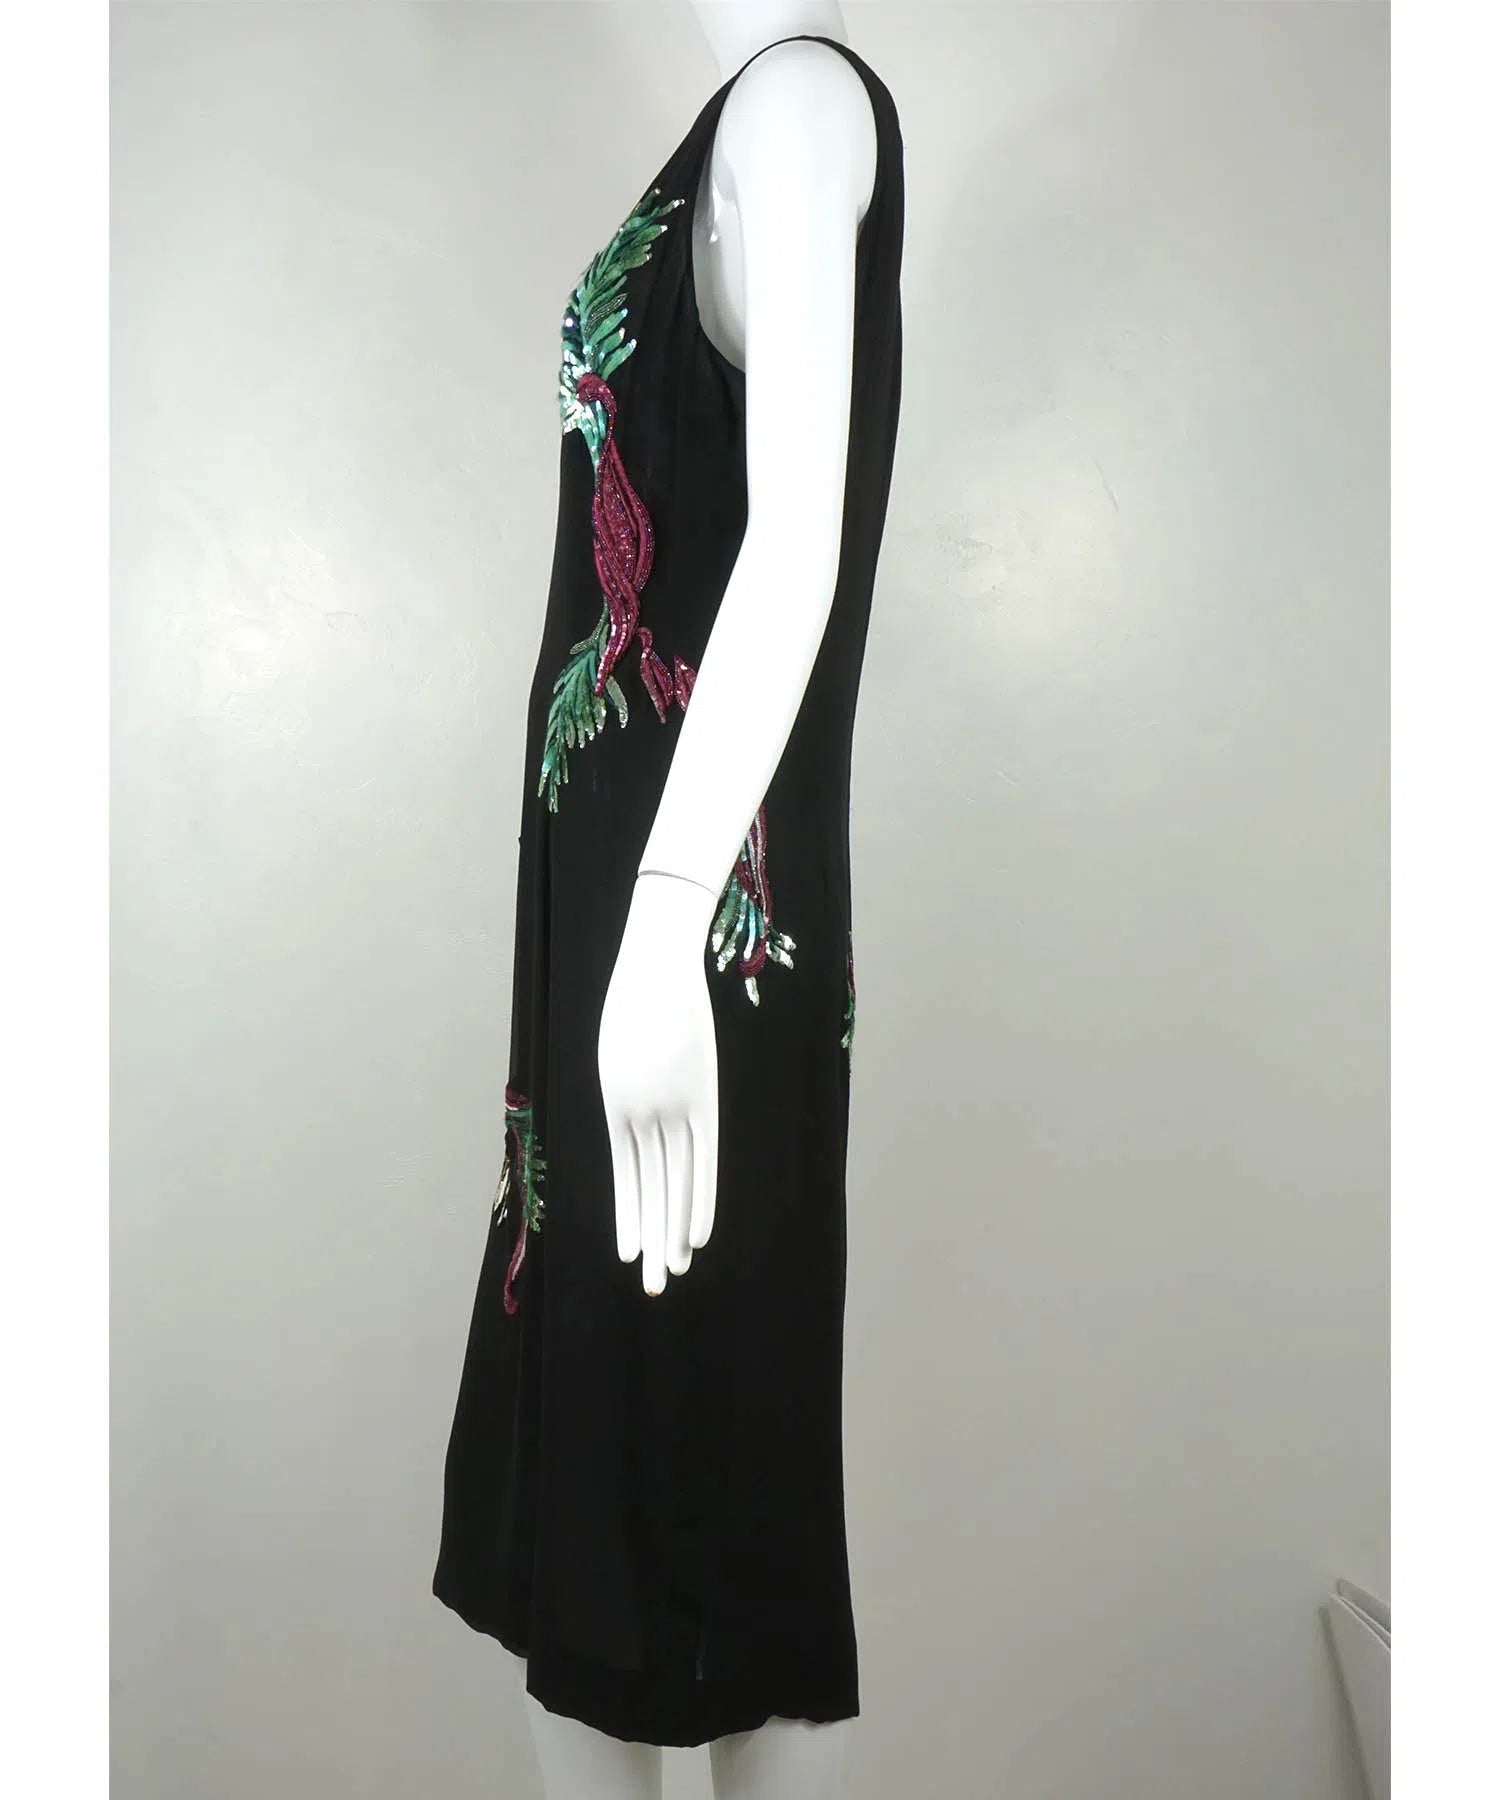 Givenchy Couture by Alexander McQueen Vintage 1997 Sequin Embroidered Bird Dress